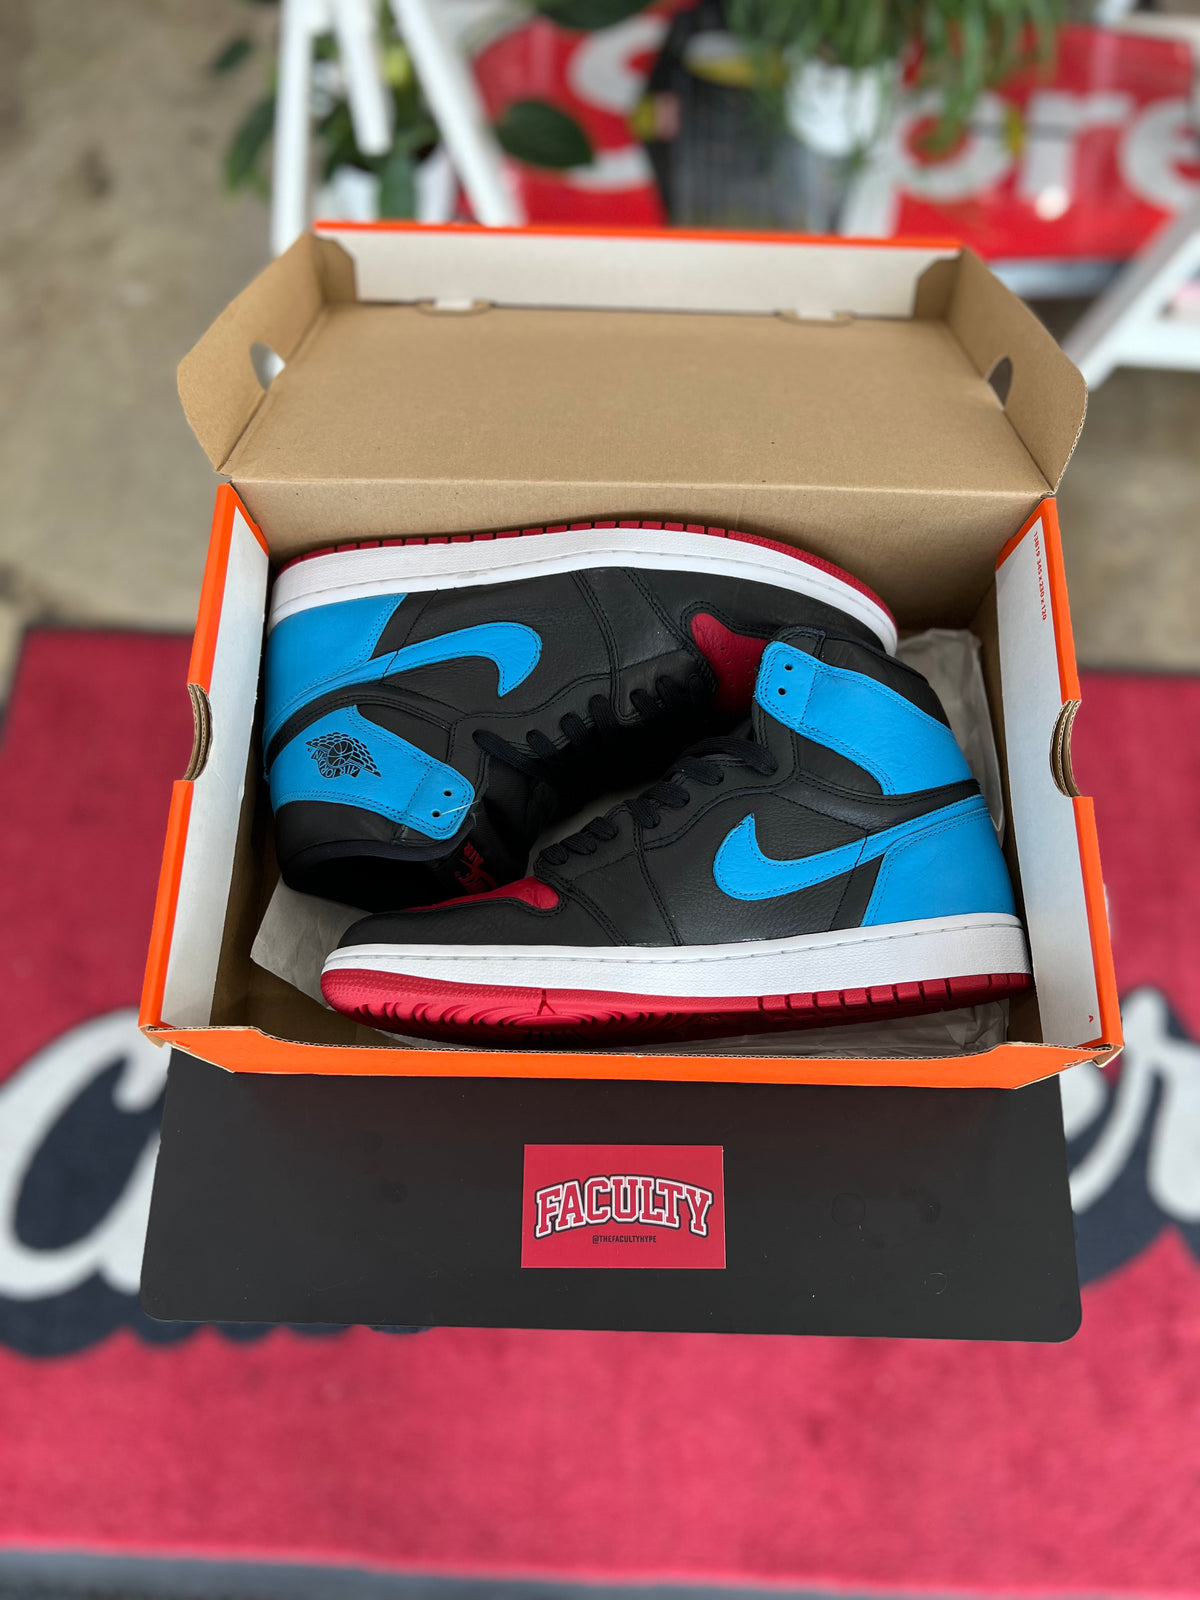 Air Jordan 1 W UNC to Chicago Leather